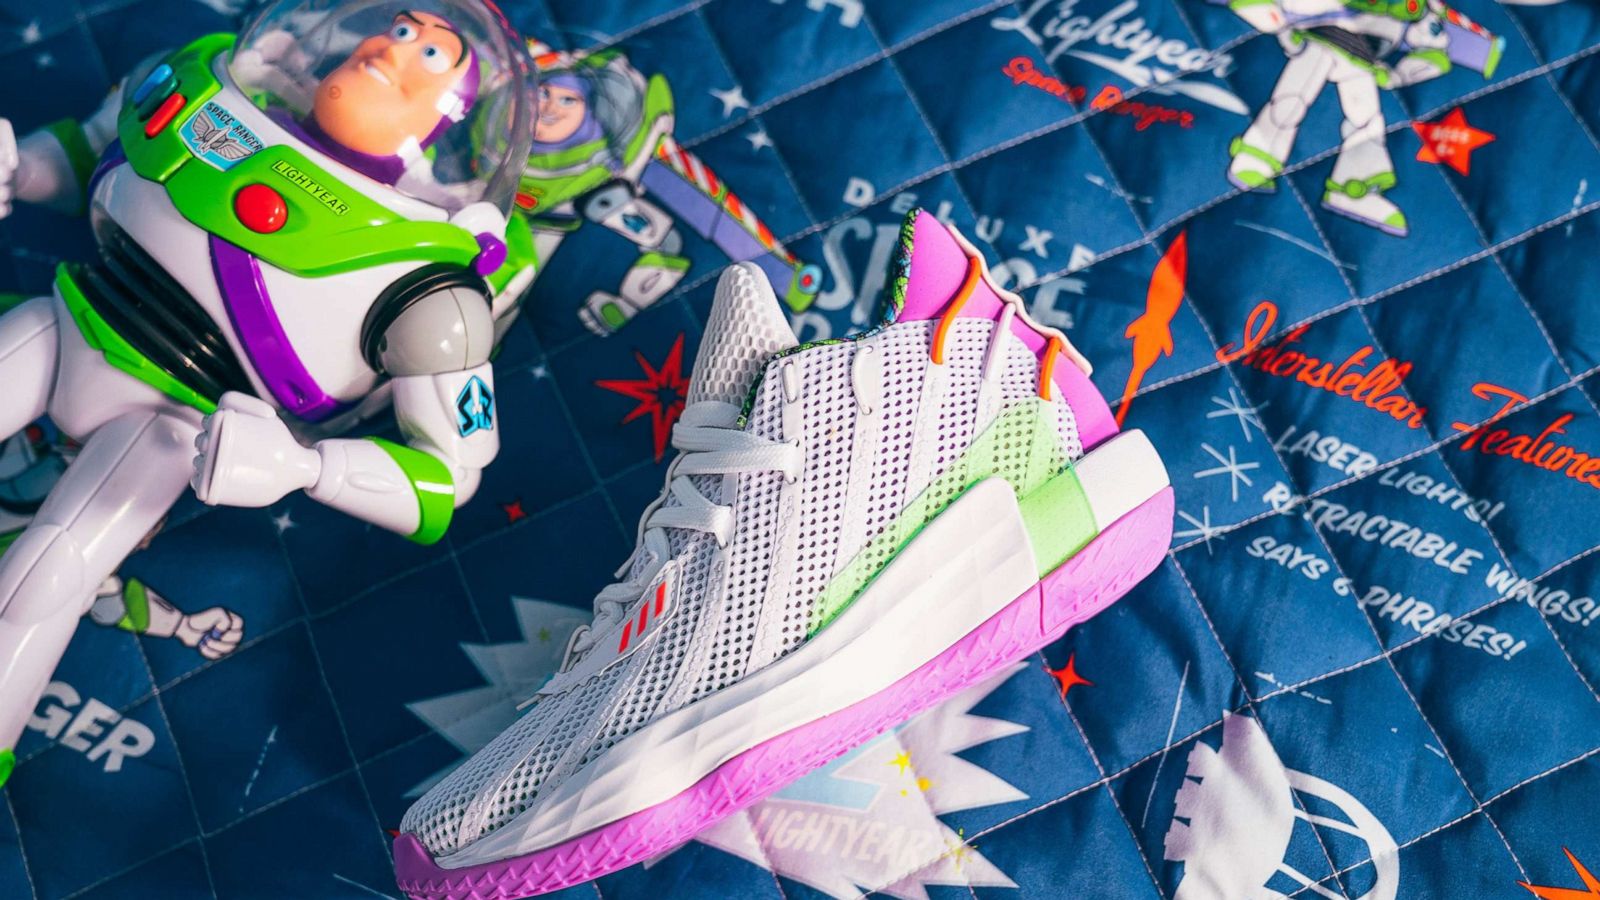 Pixar debut 'Toy Story' shoe collection 